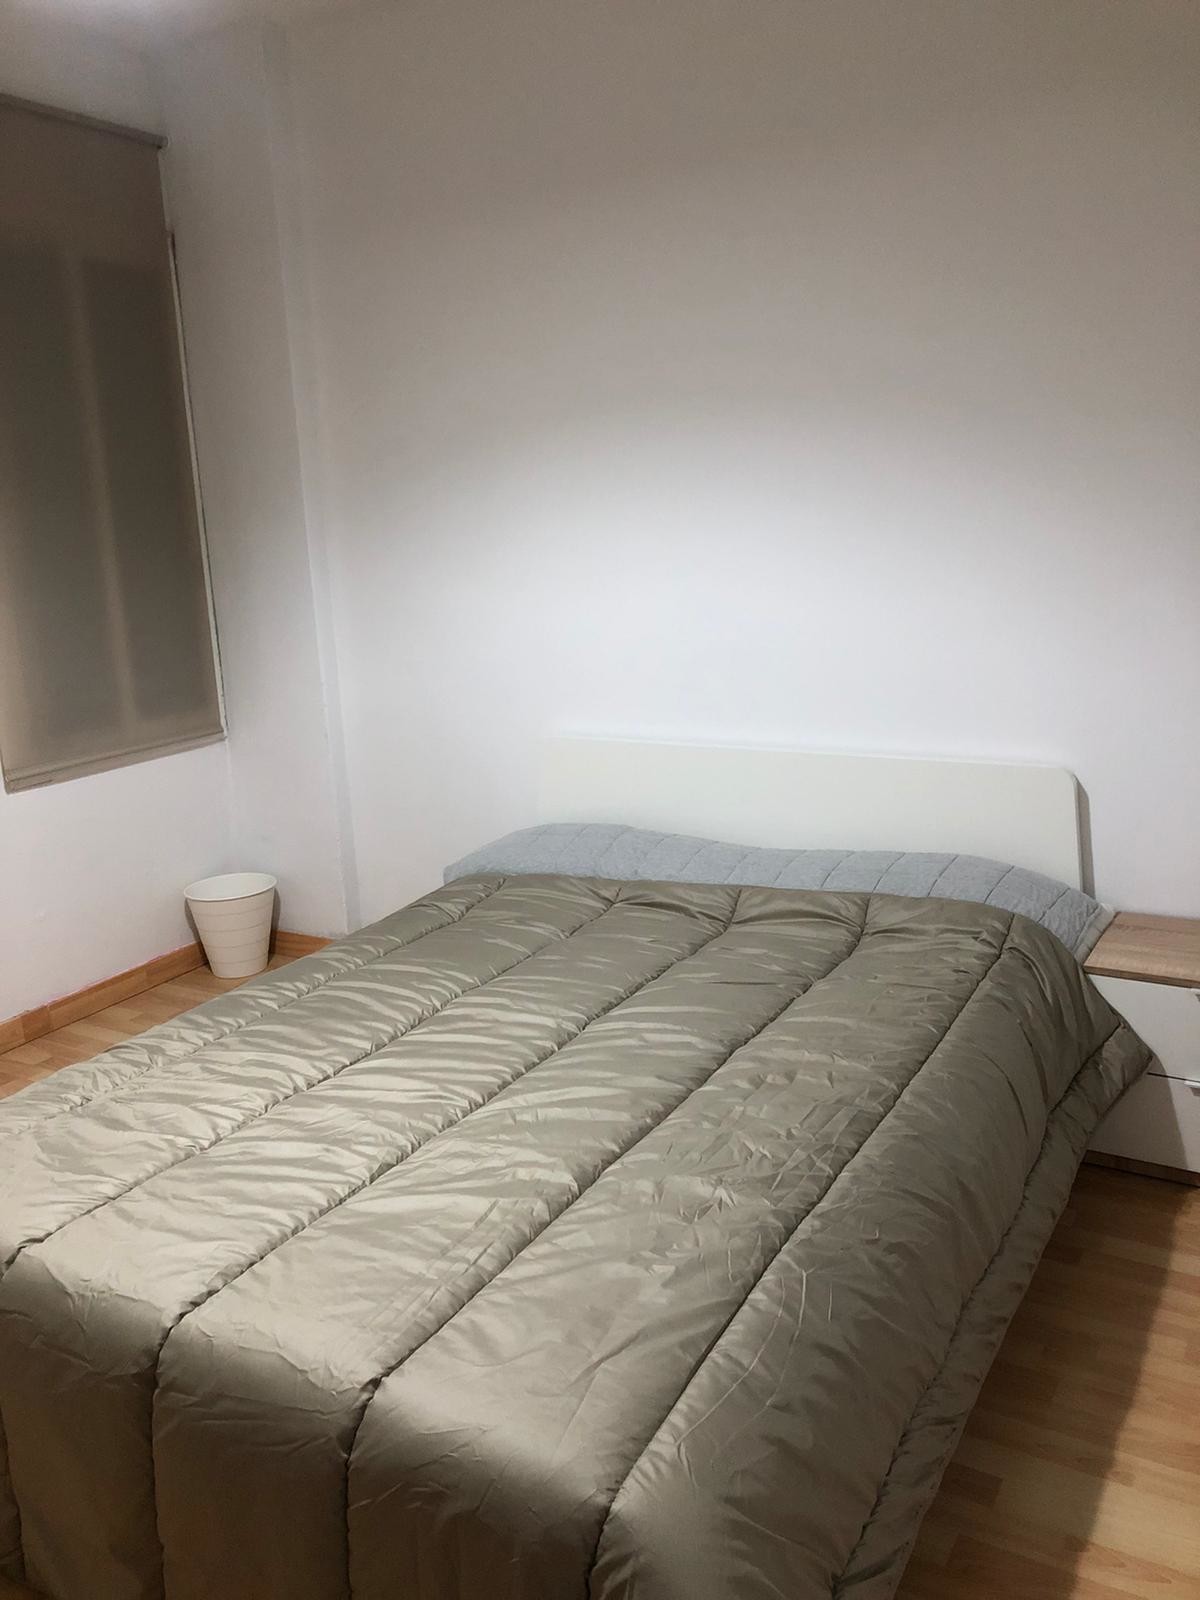 Double bed room, with all you can need for your st